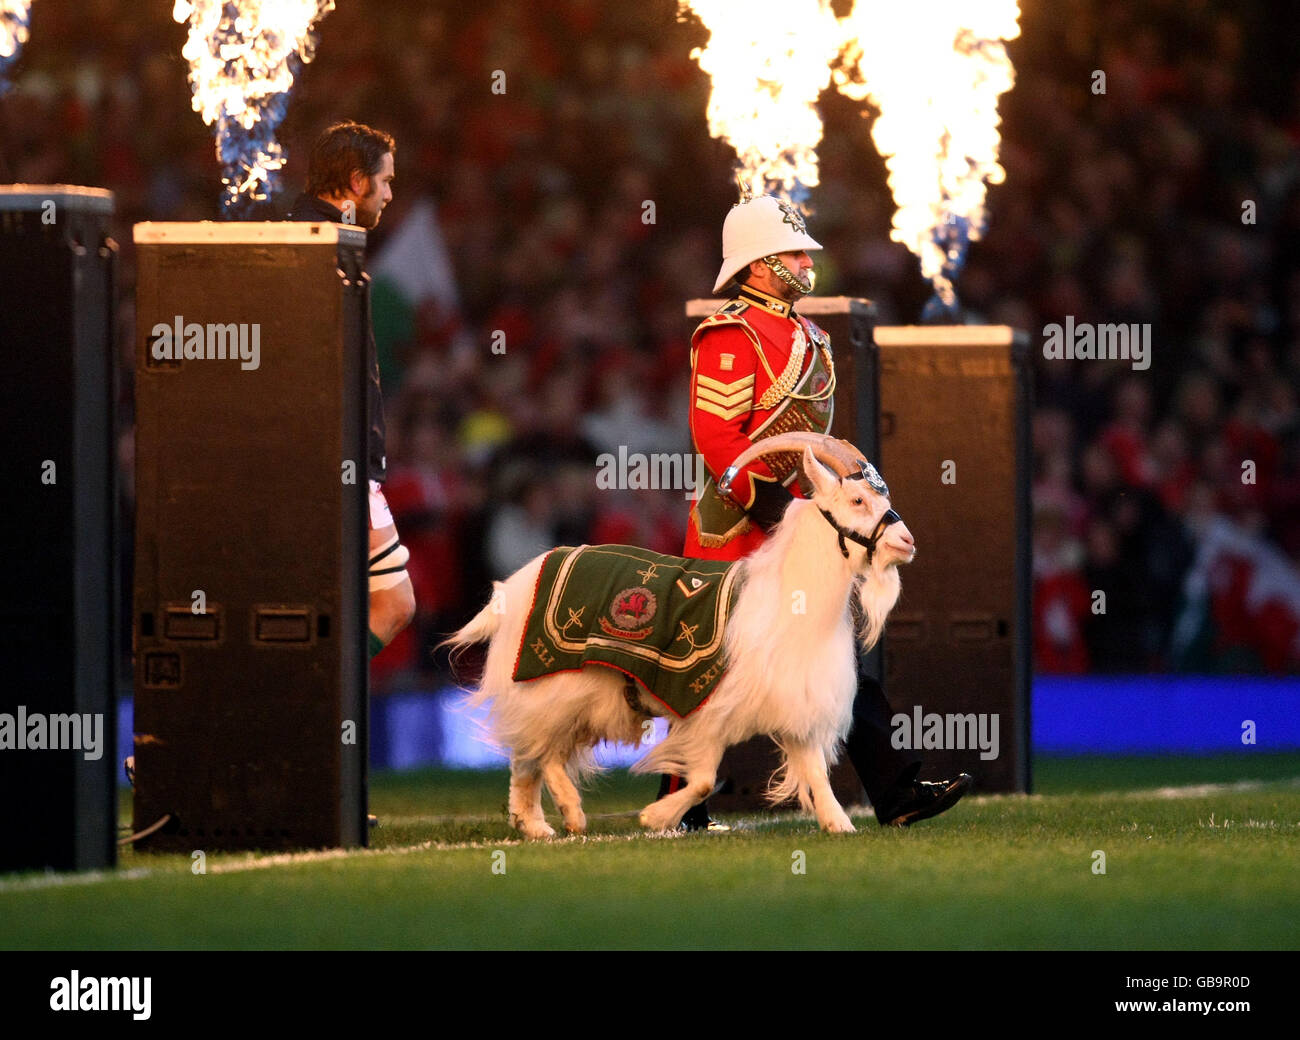 'Shenkin' the goat (front) and Goat Major Sgt. David Joseph BEM lead the Welsh team onto the pitch prior to the Invesco Perpetual Series match at the Millennium Stadium, Cardiff. Stock Photo